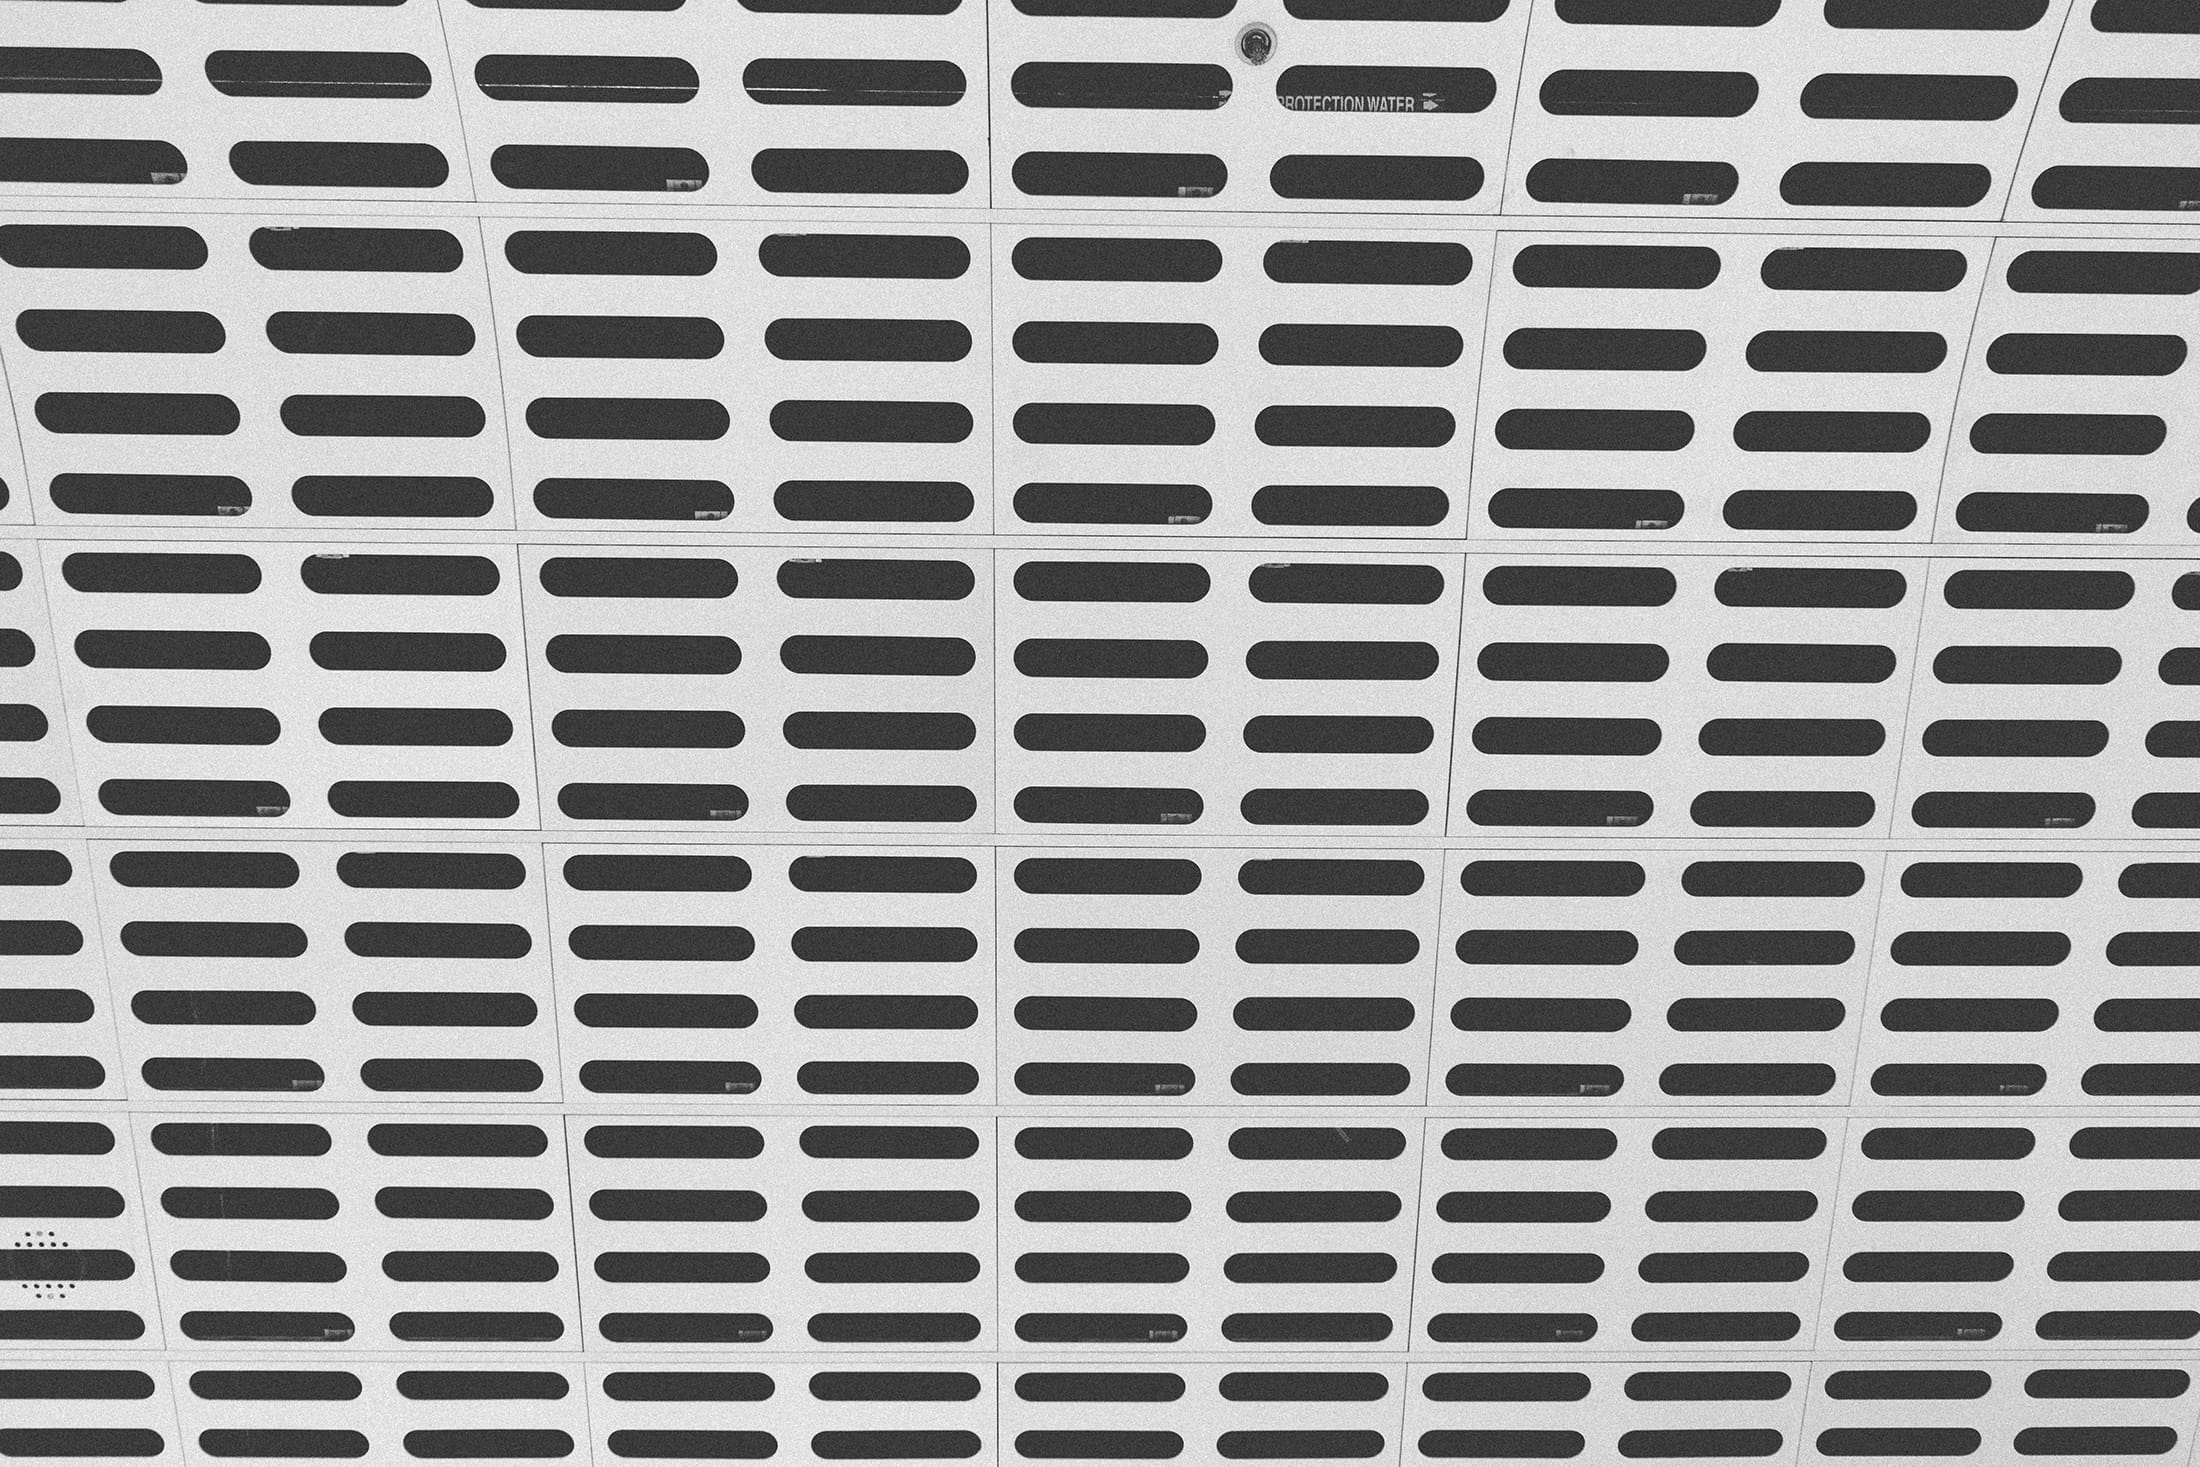 grid, grill, pattern, texture, metal, background, ceiling, holes